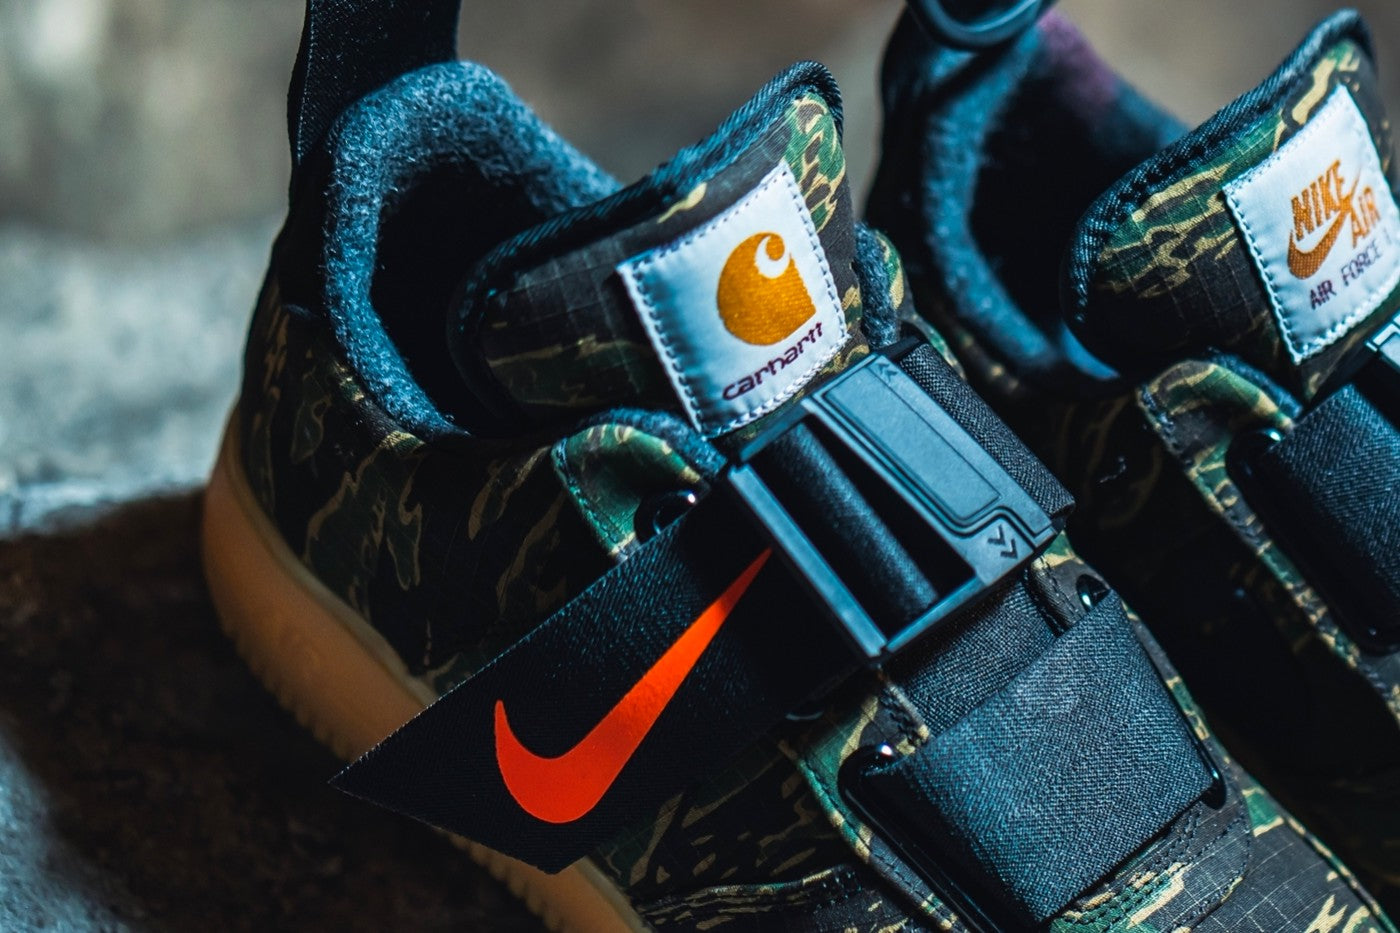 A Carhartt WIP x Nike SB Collaboration is Dropping This Year